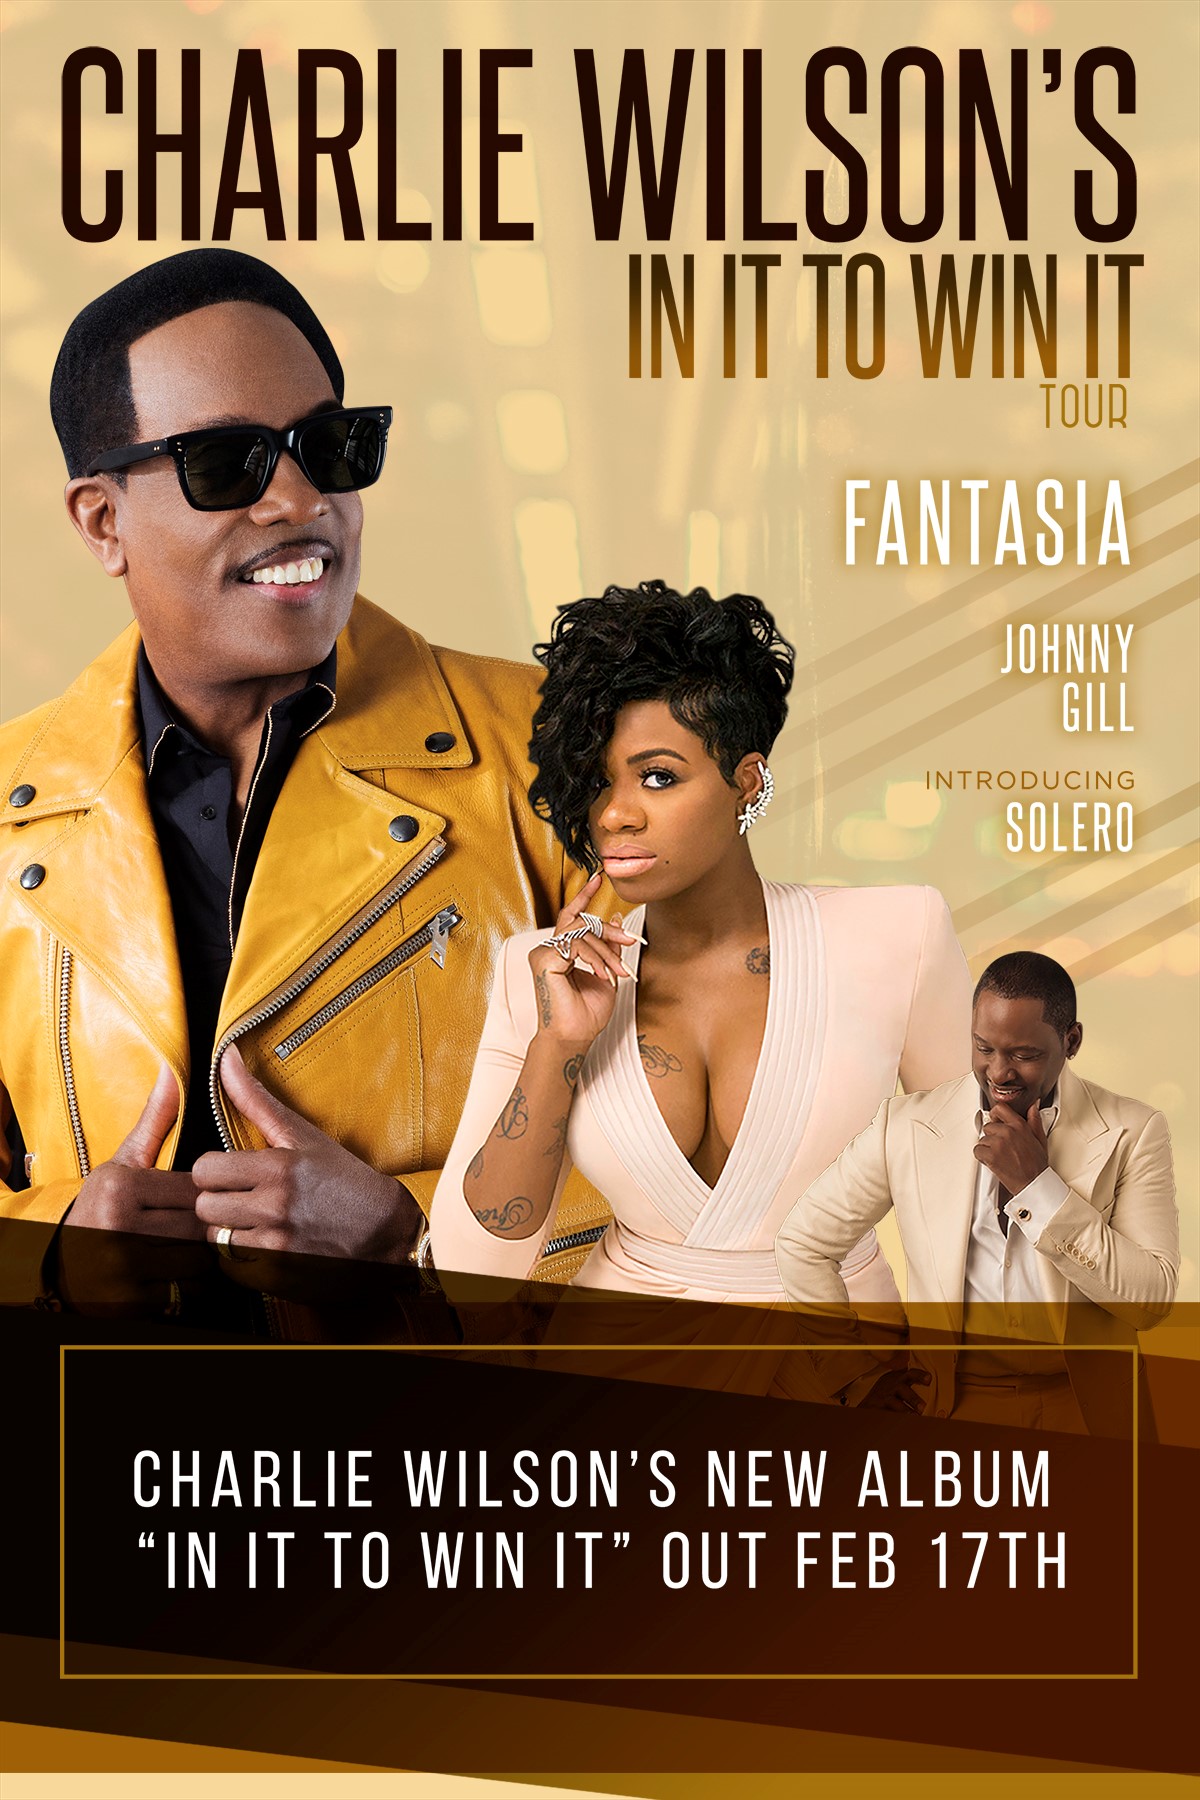 Charlie Wilson Announces New Album "In It To Win It" + New Tour for 2017